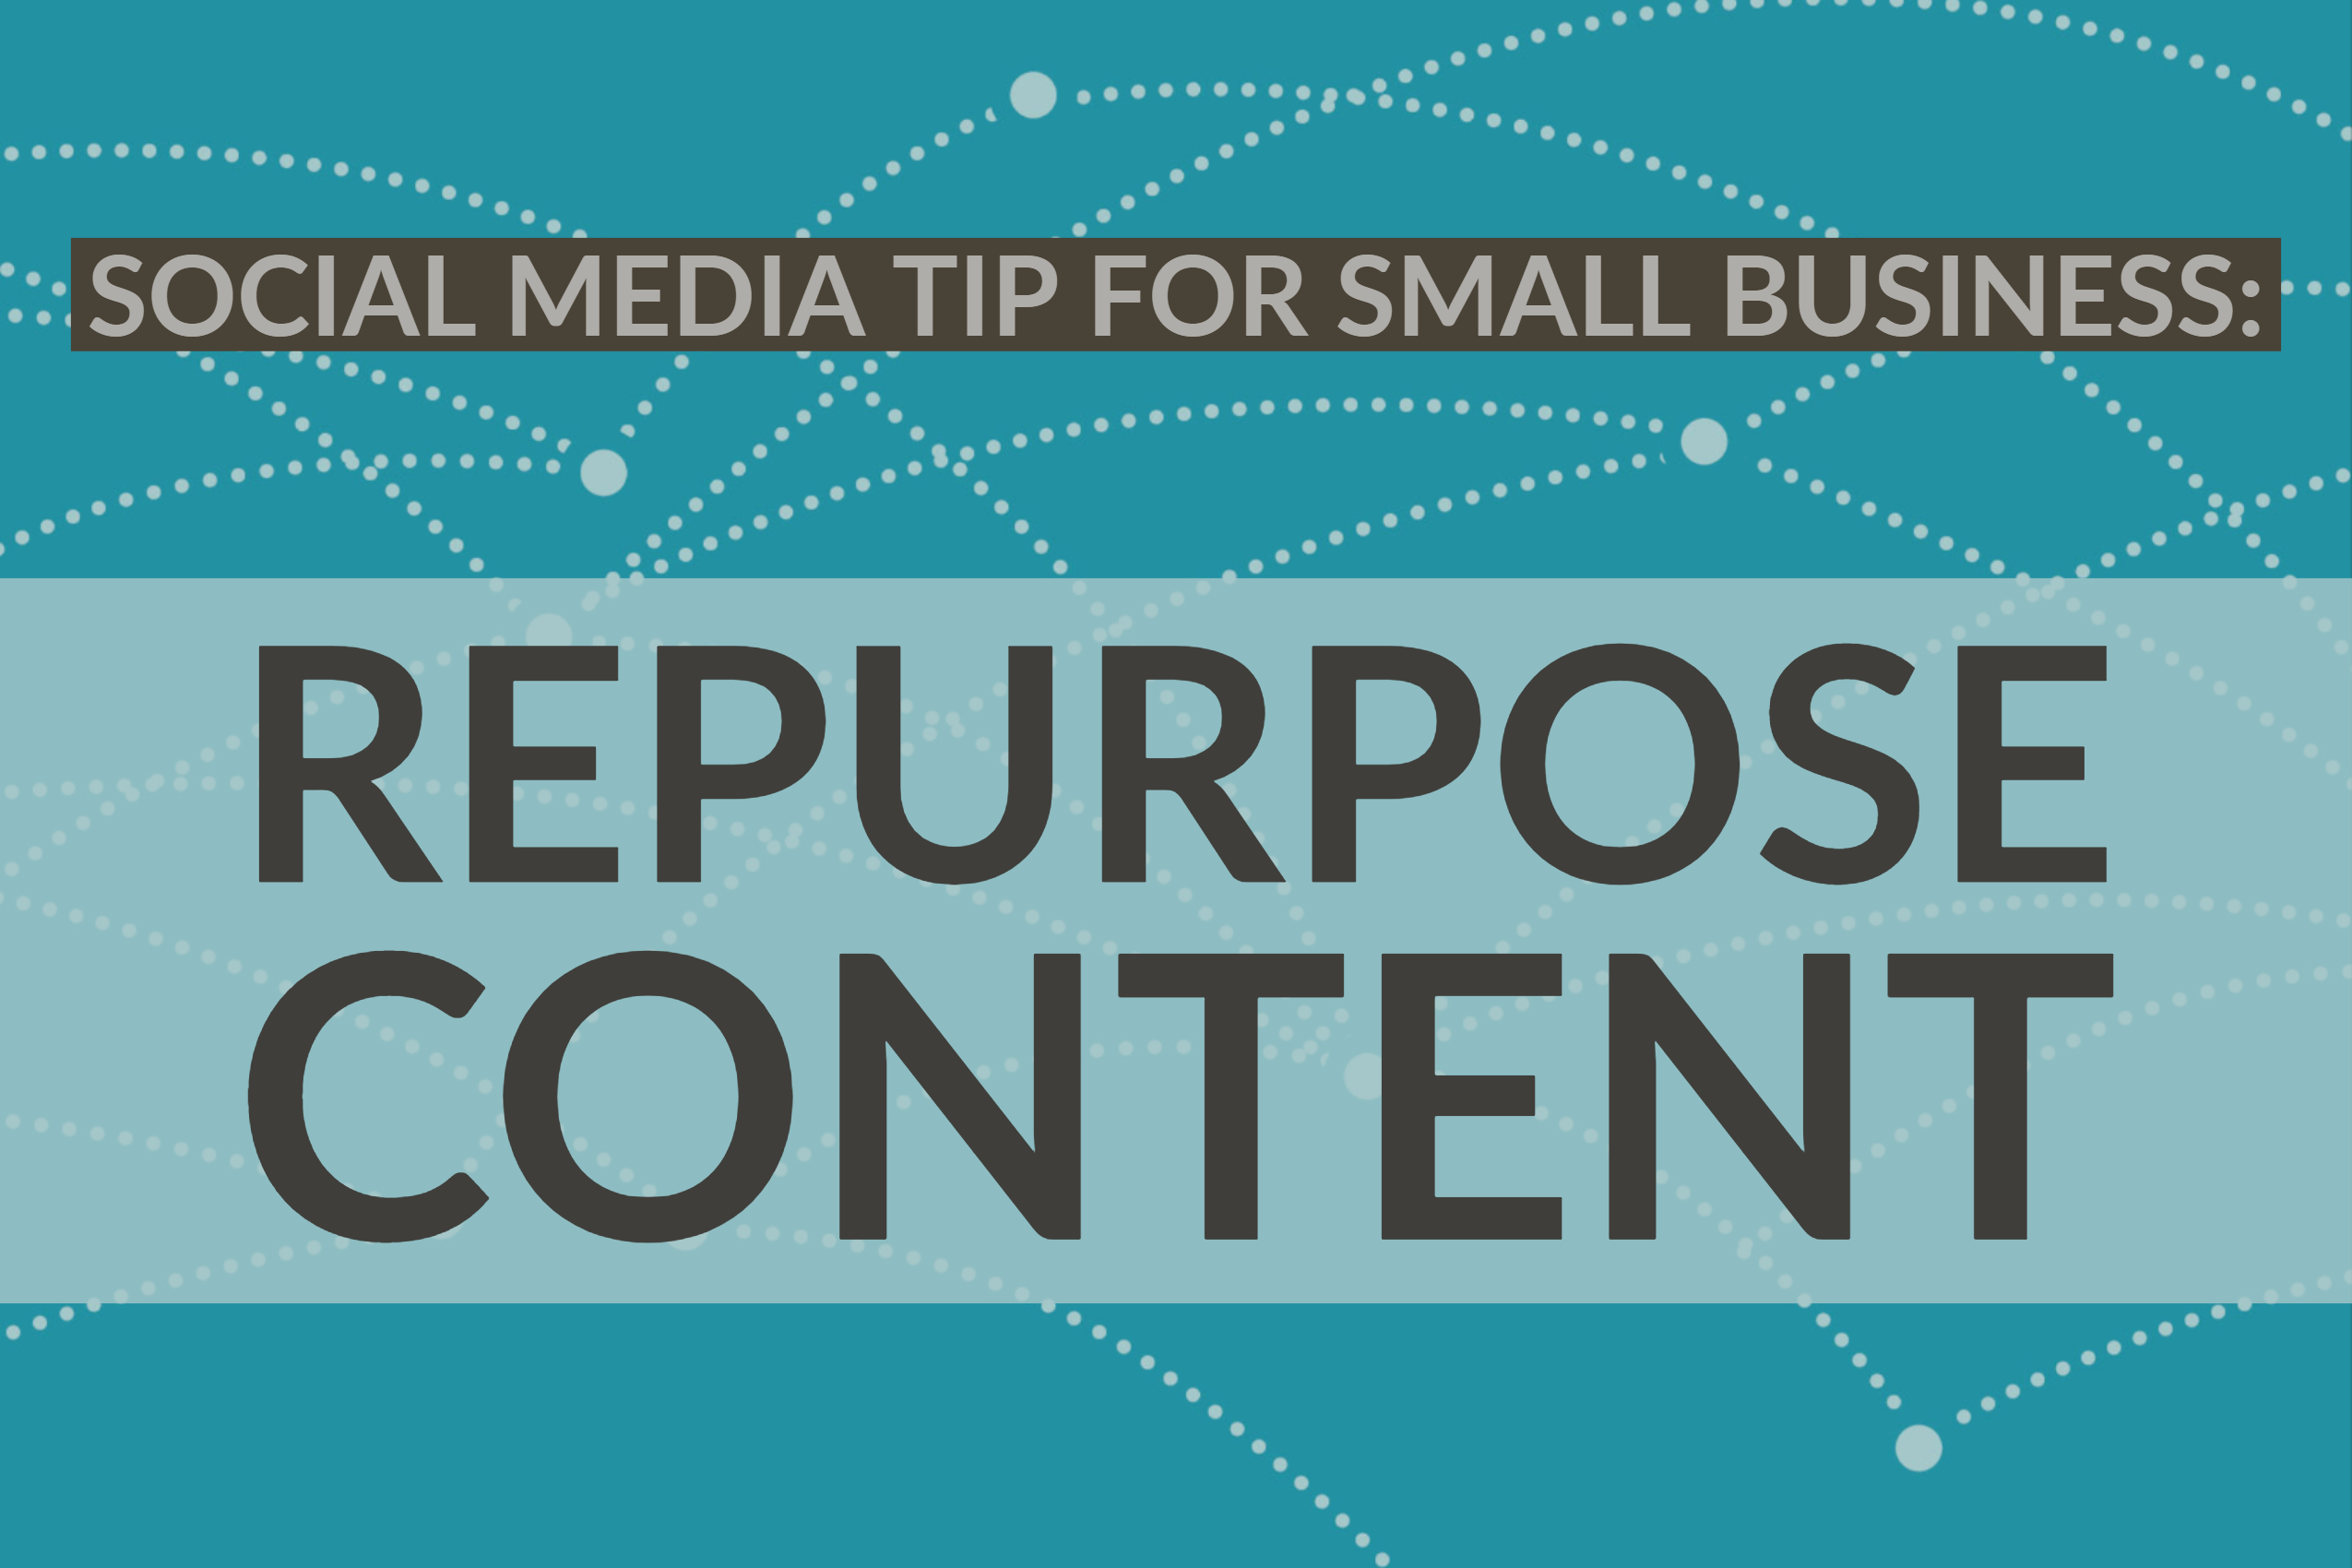 Social Media Tip For Small Business: Repurpose Content